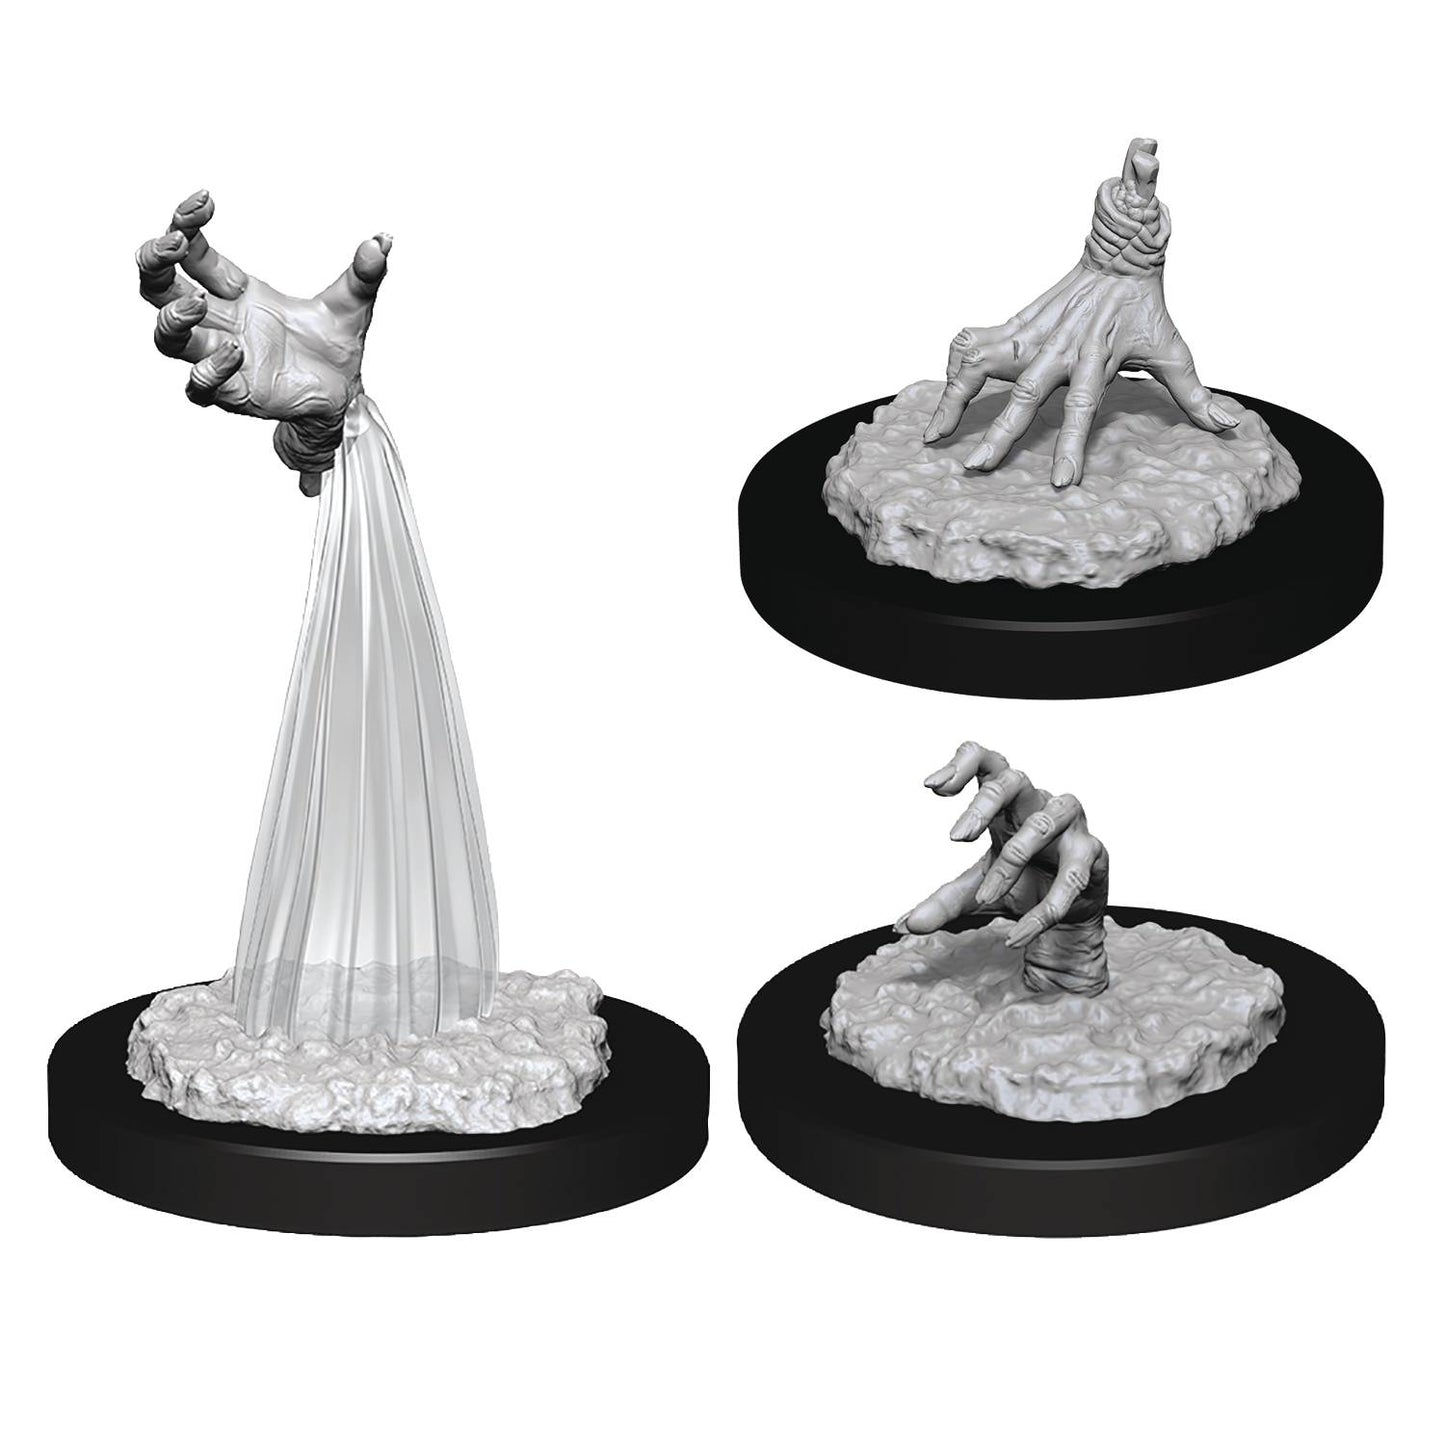 D&D Unpainted Crawling Claws Miniature